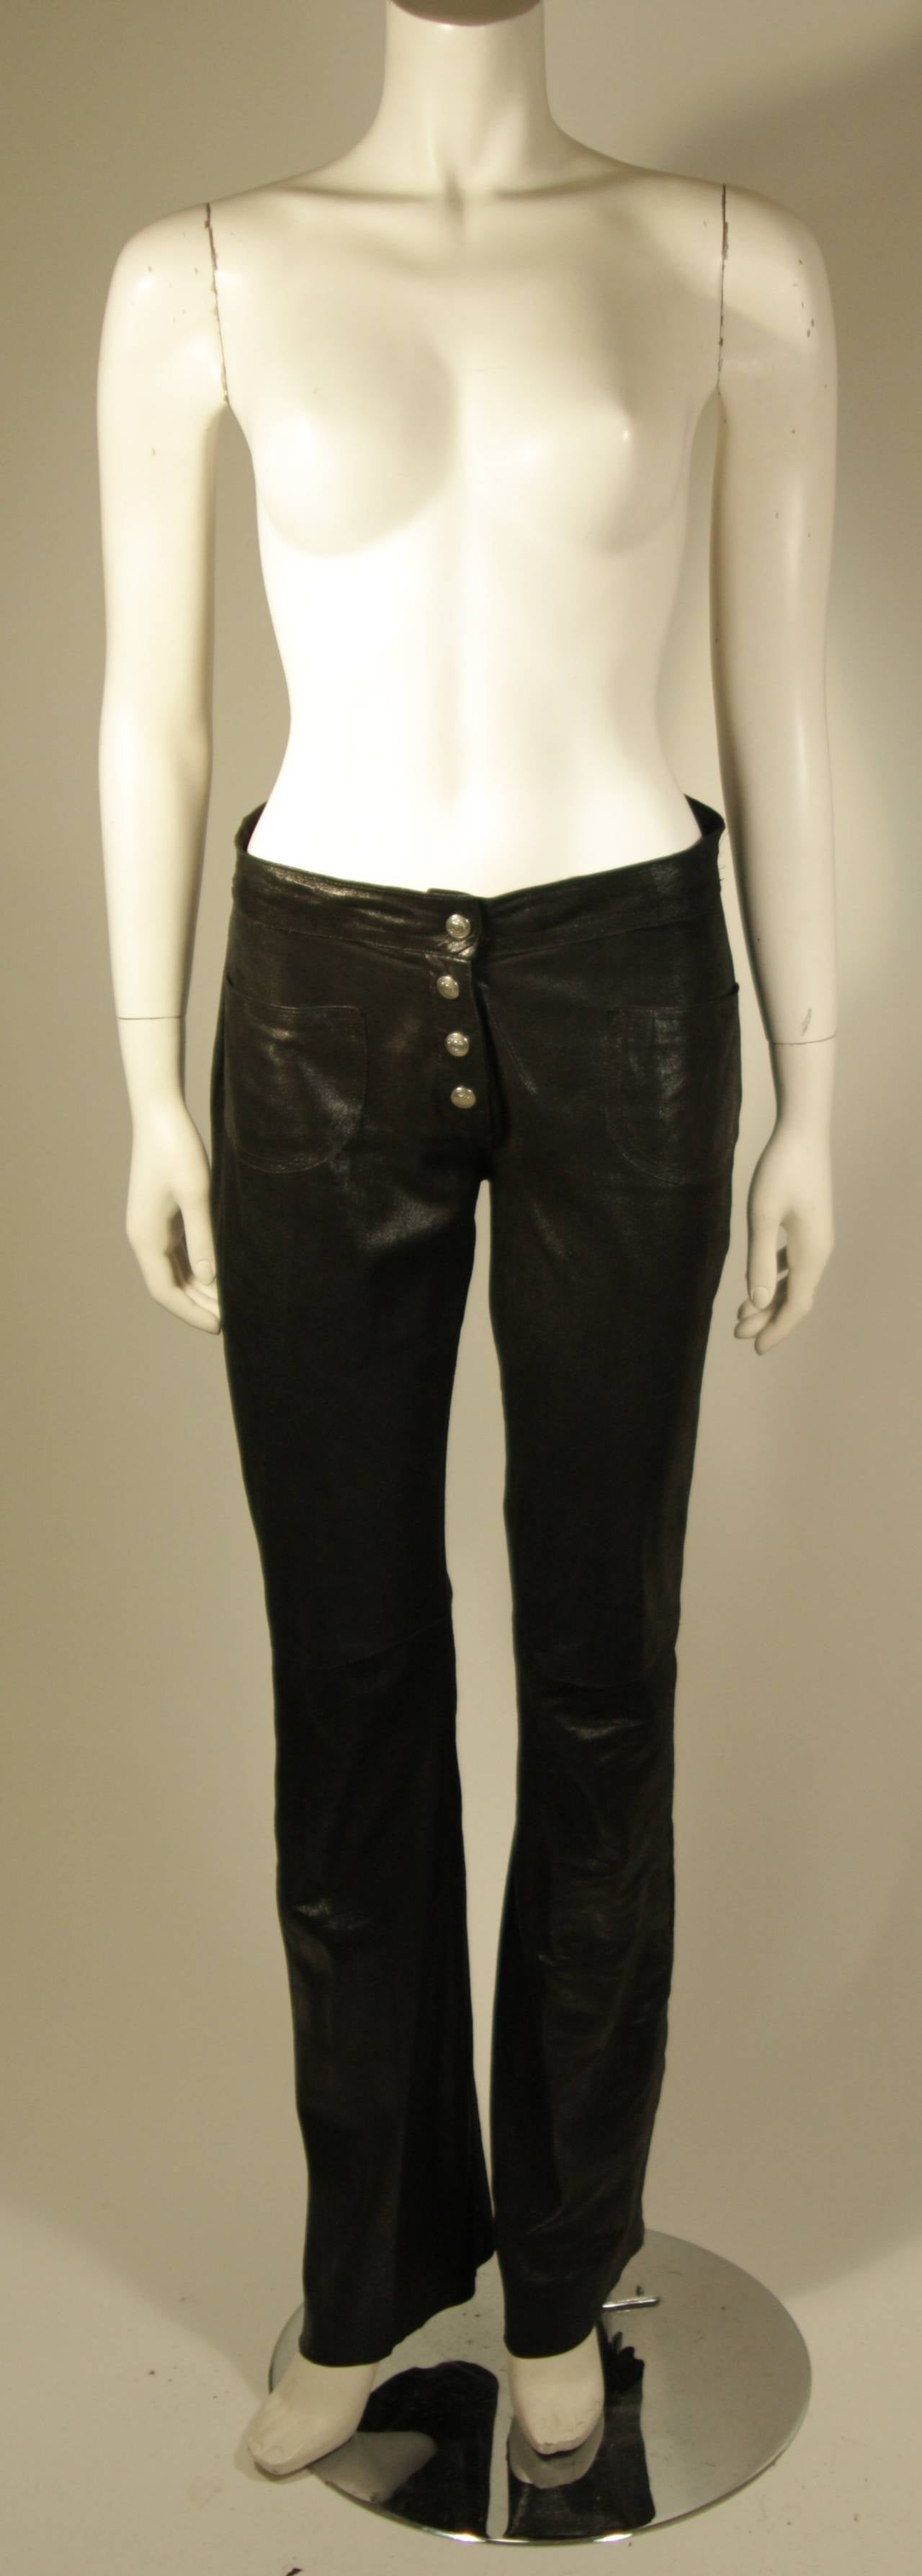 These Christian Dior pants are composed of a lightweight black suede with an oiled effect which causes a light sheen. There are two front patch style pockets and a zipper closure with top button snap and faux snap button look. Made in France.